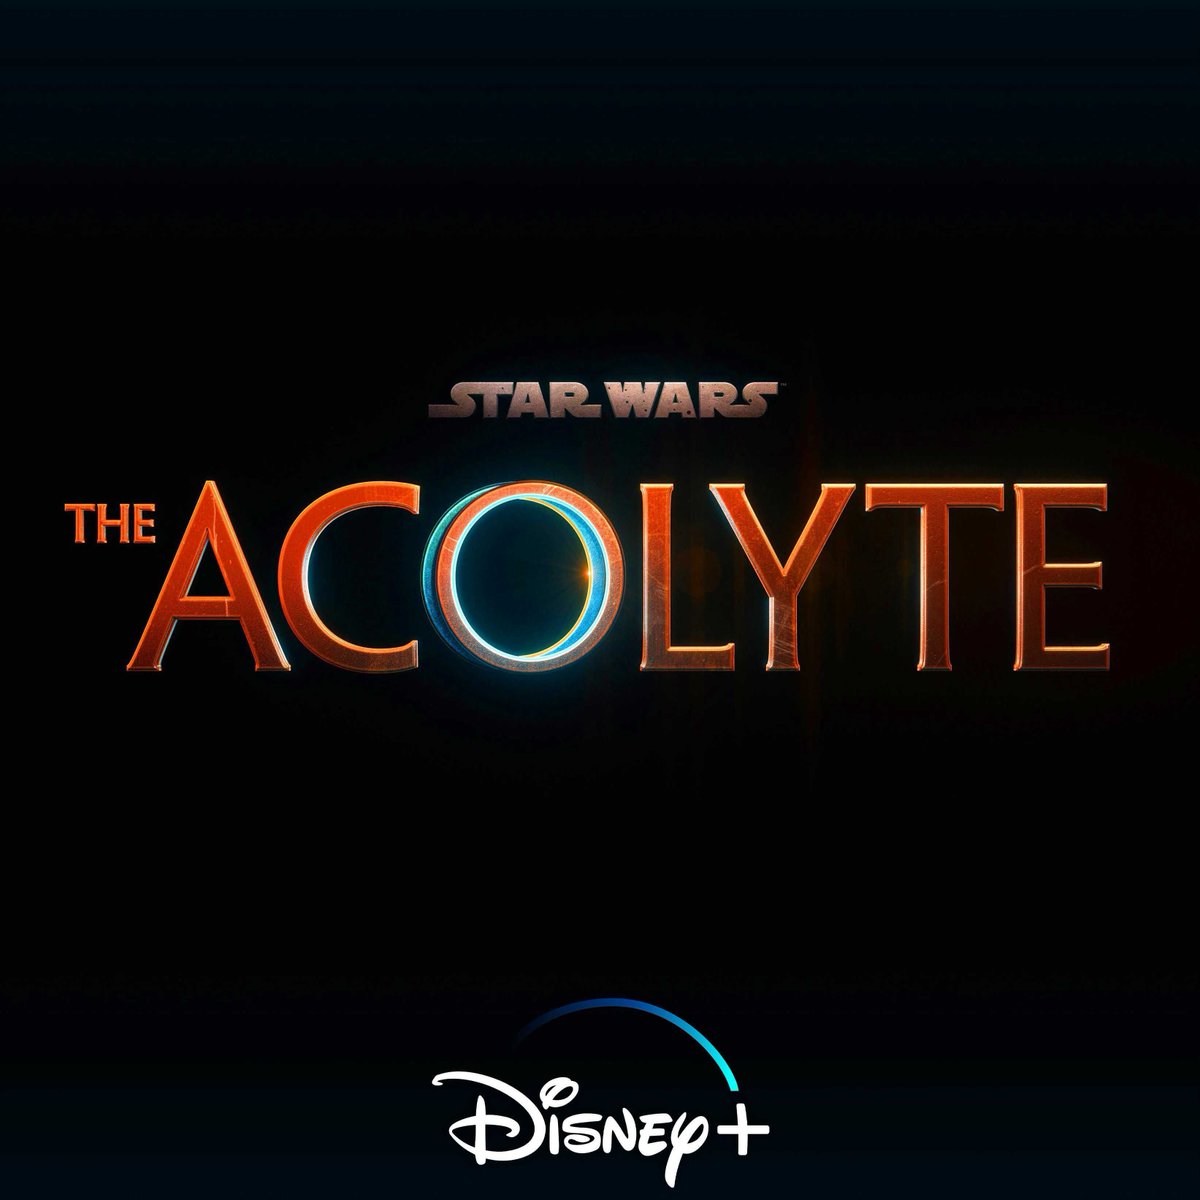 OFFICIAL: #TheAcolyte will premiere on Disney+ on June 4!